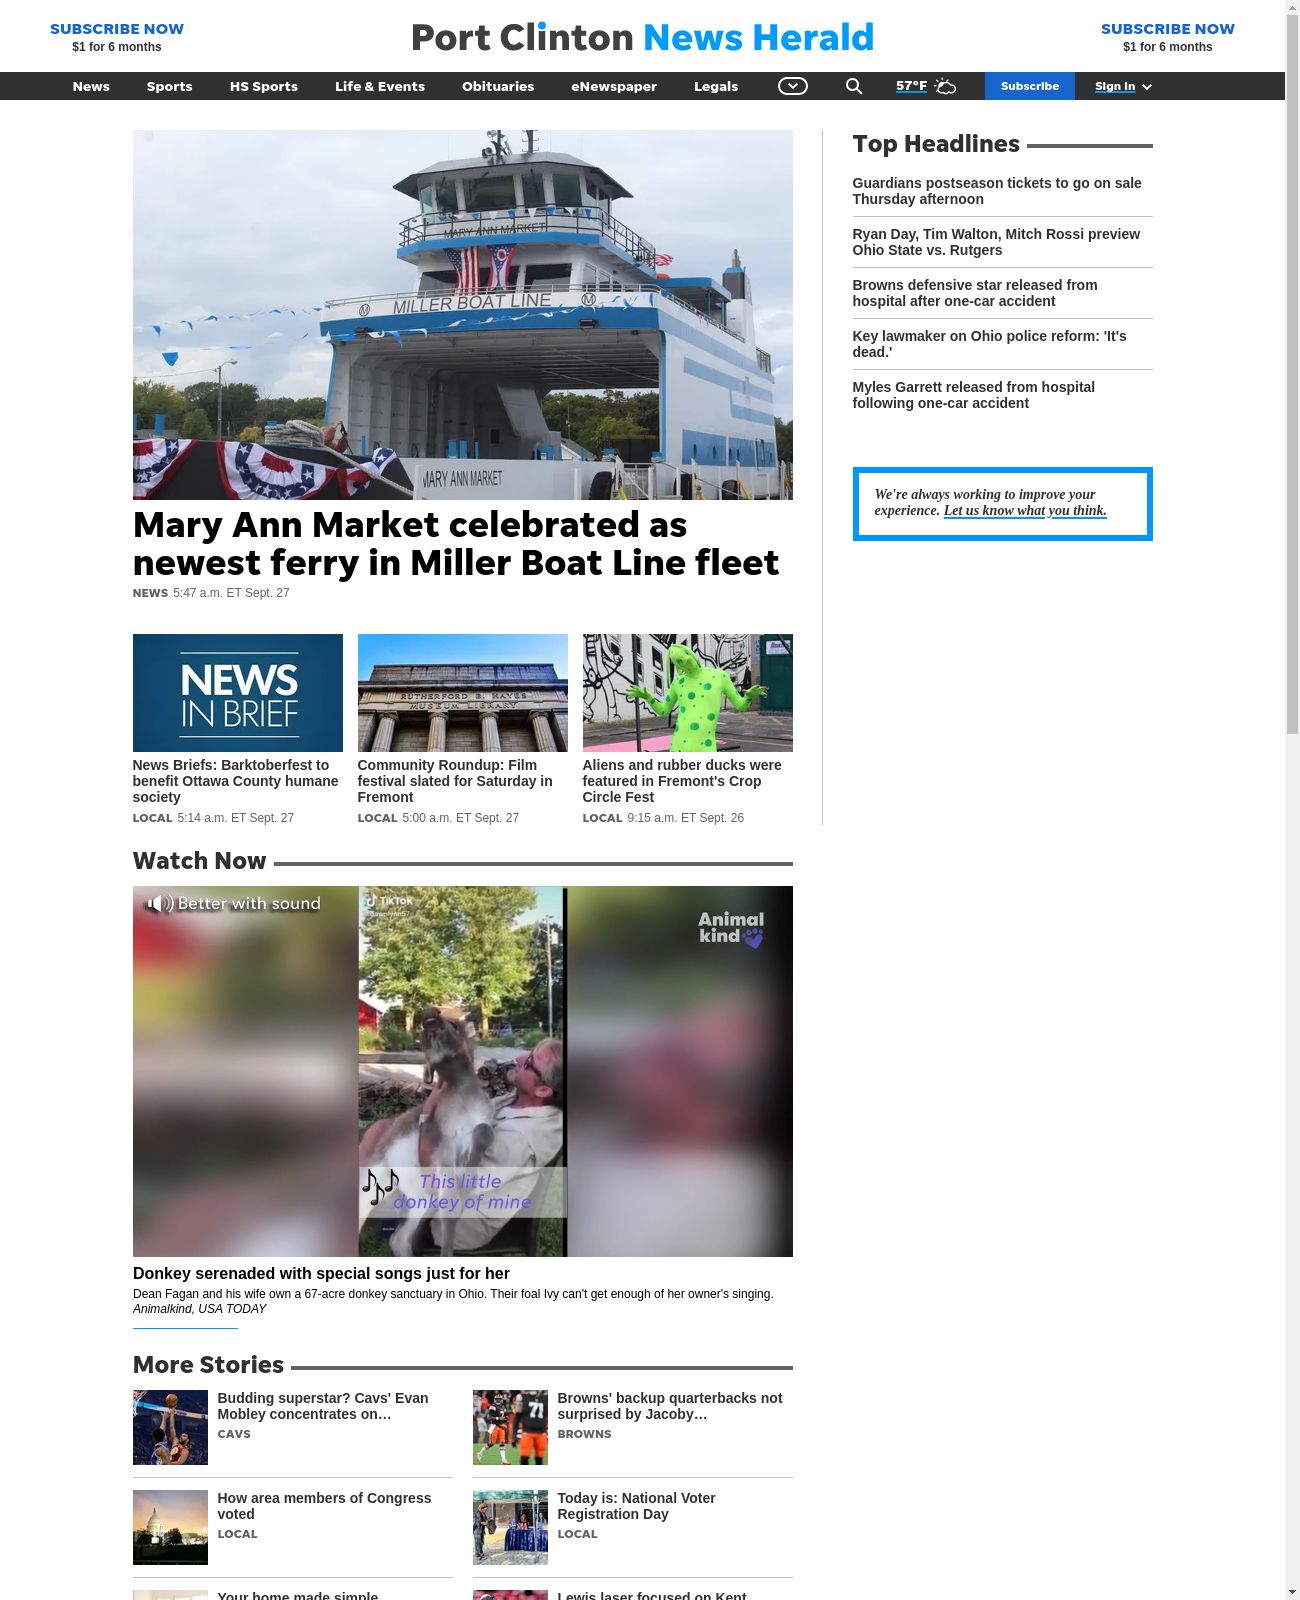 Port Clinton News Herald at 2022-09-27 15:10:47-04:00 local time